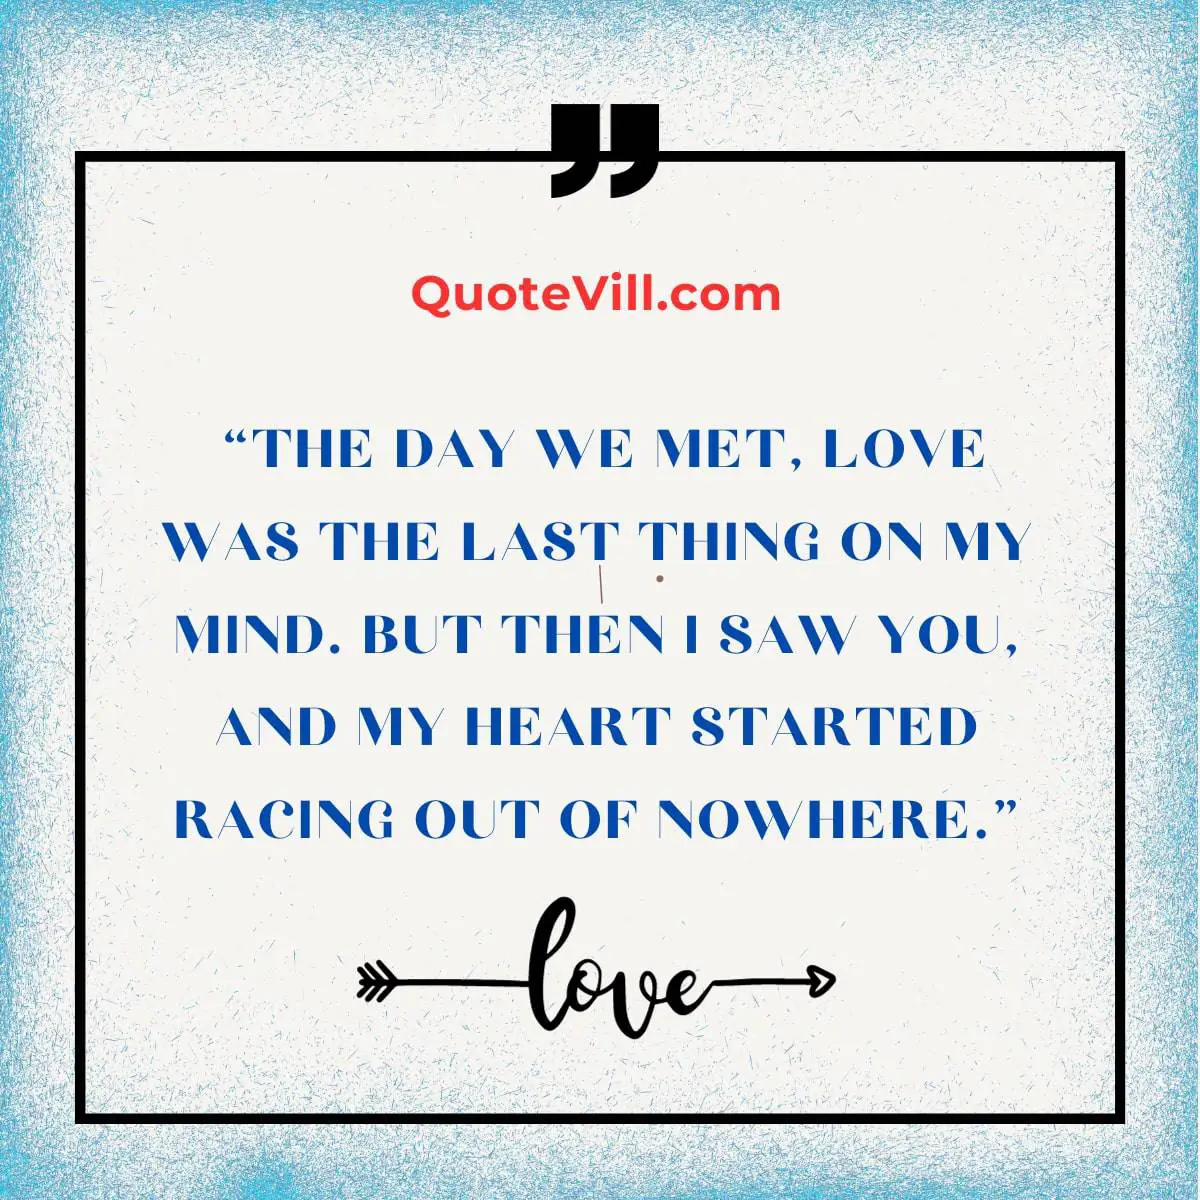 Love-At-First-Sight-Messages-and-Quotes